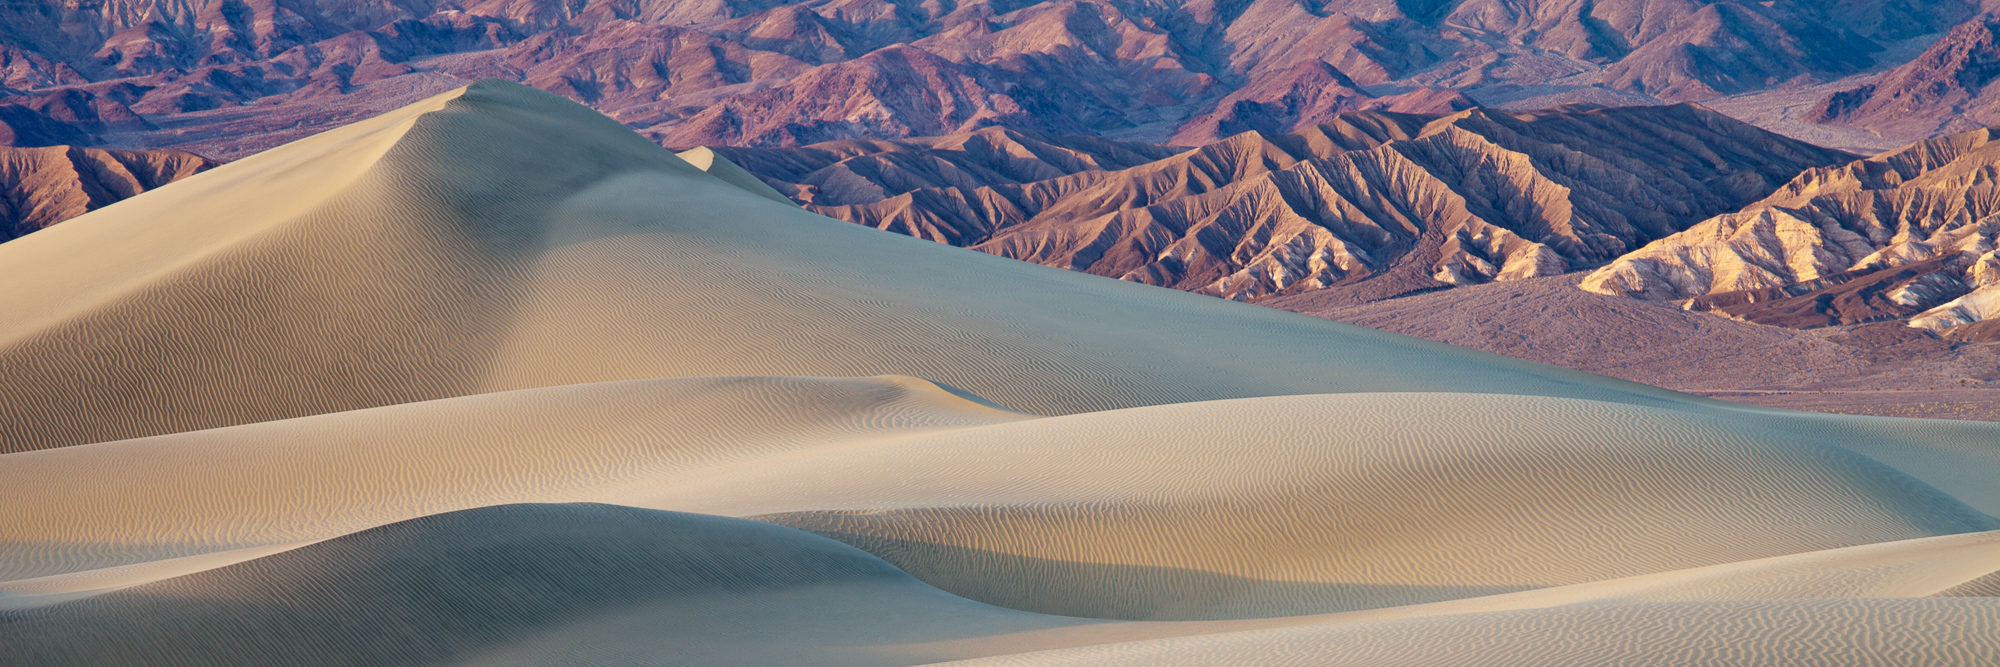 Mountains rise beyond the sand dunes of Mesquite Flat, Death Valley National Park